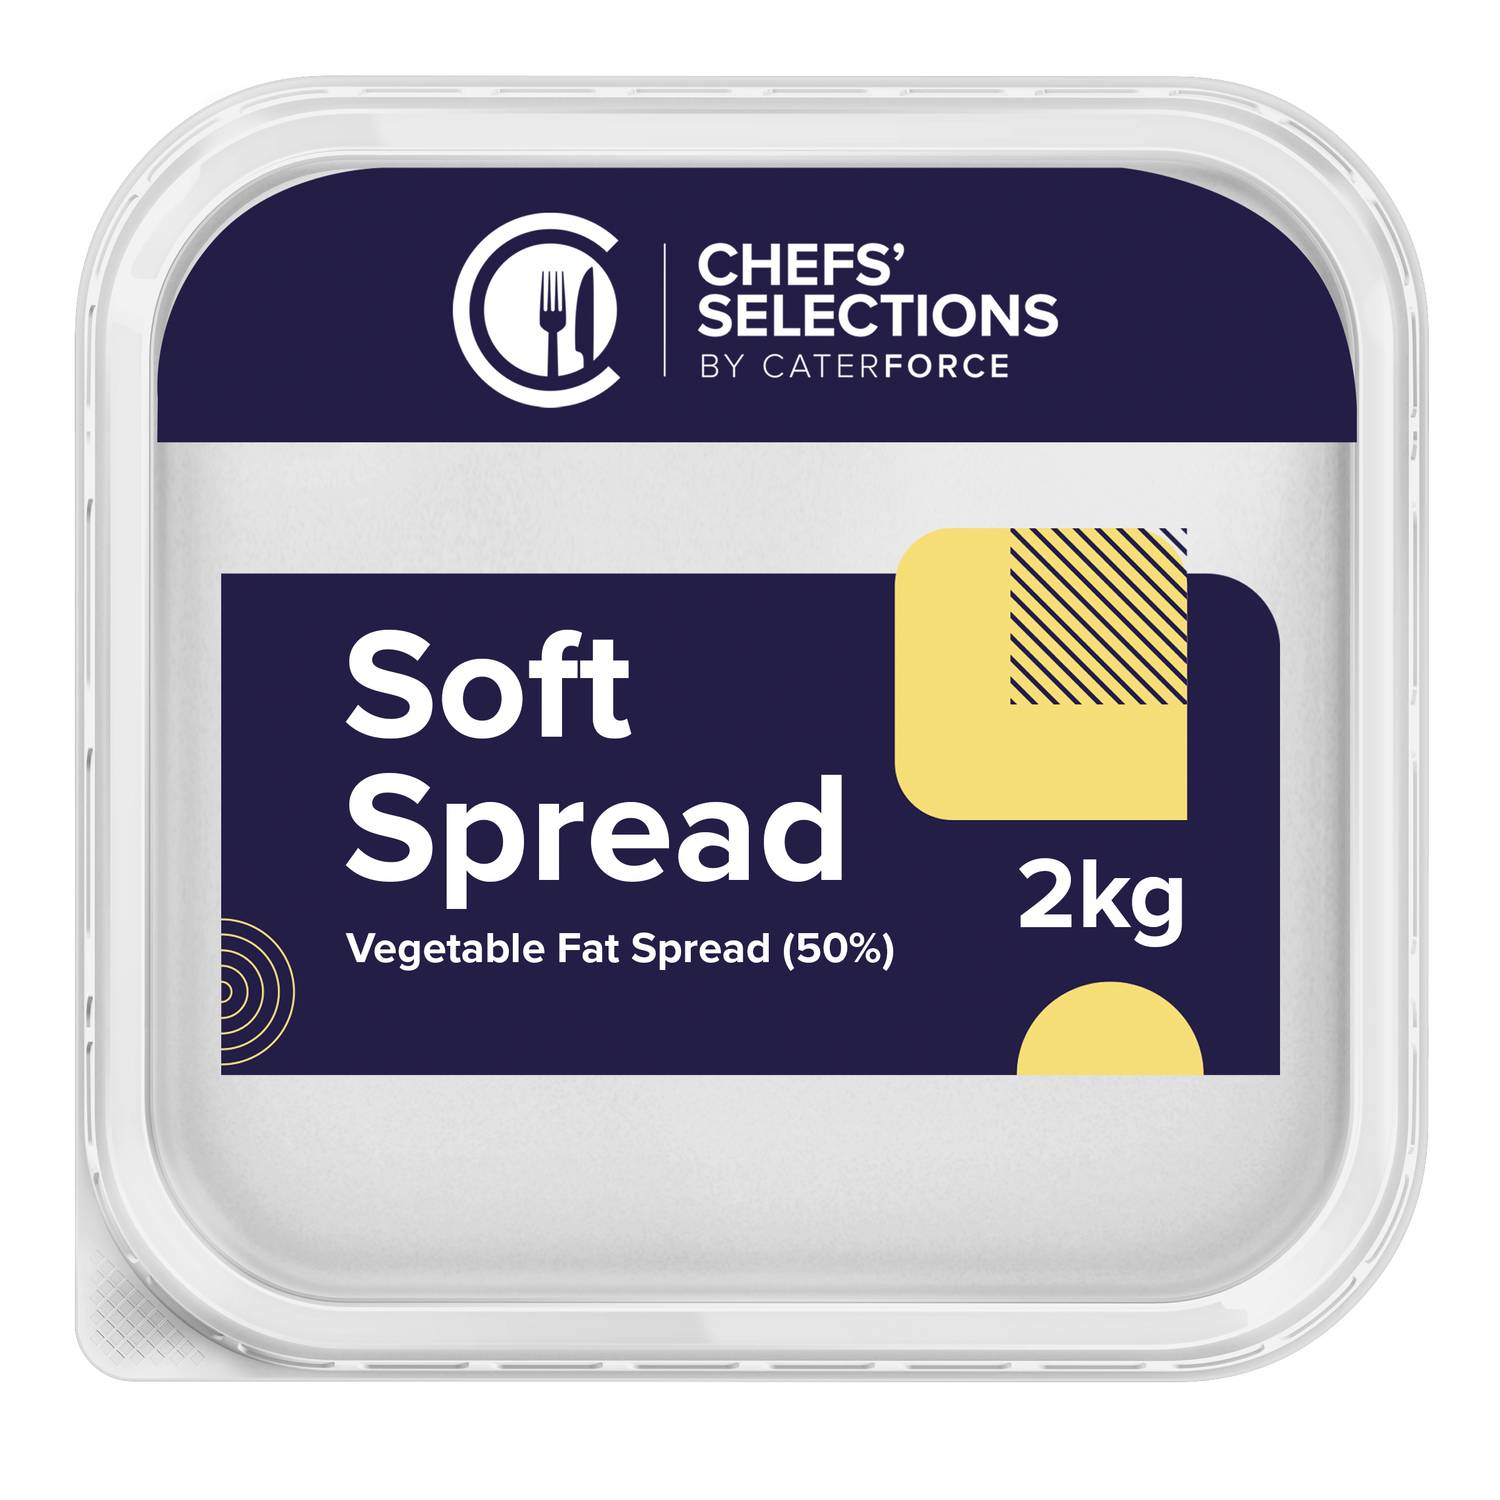 Chefs’ Selections Soft Spread (6 x 2kg)